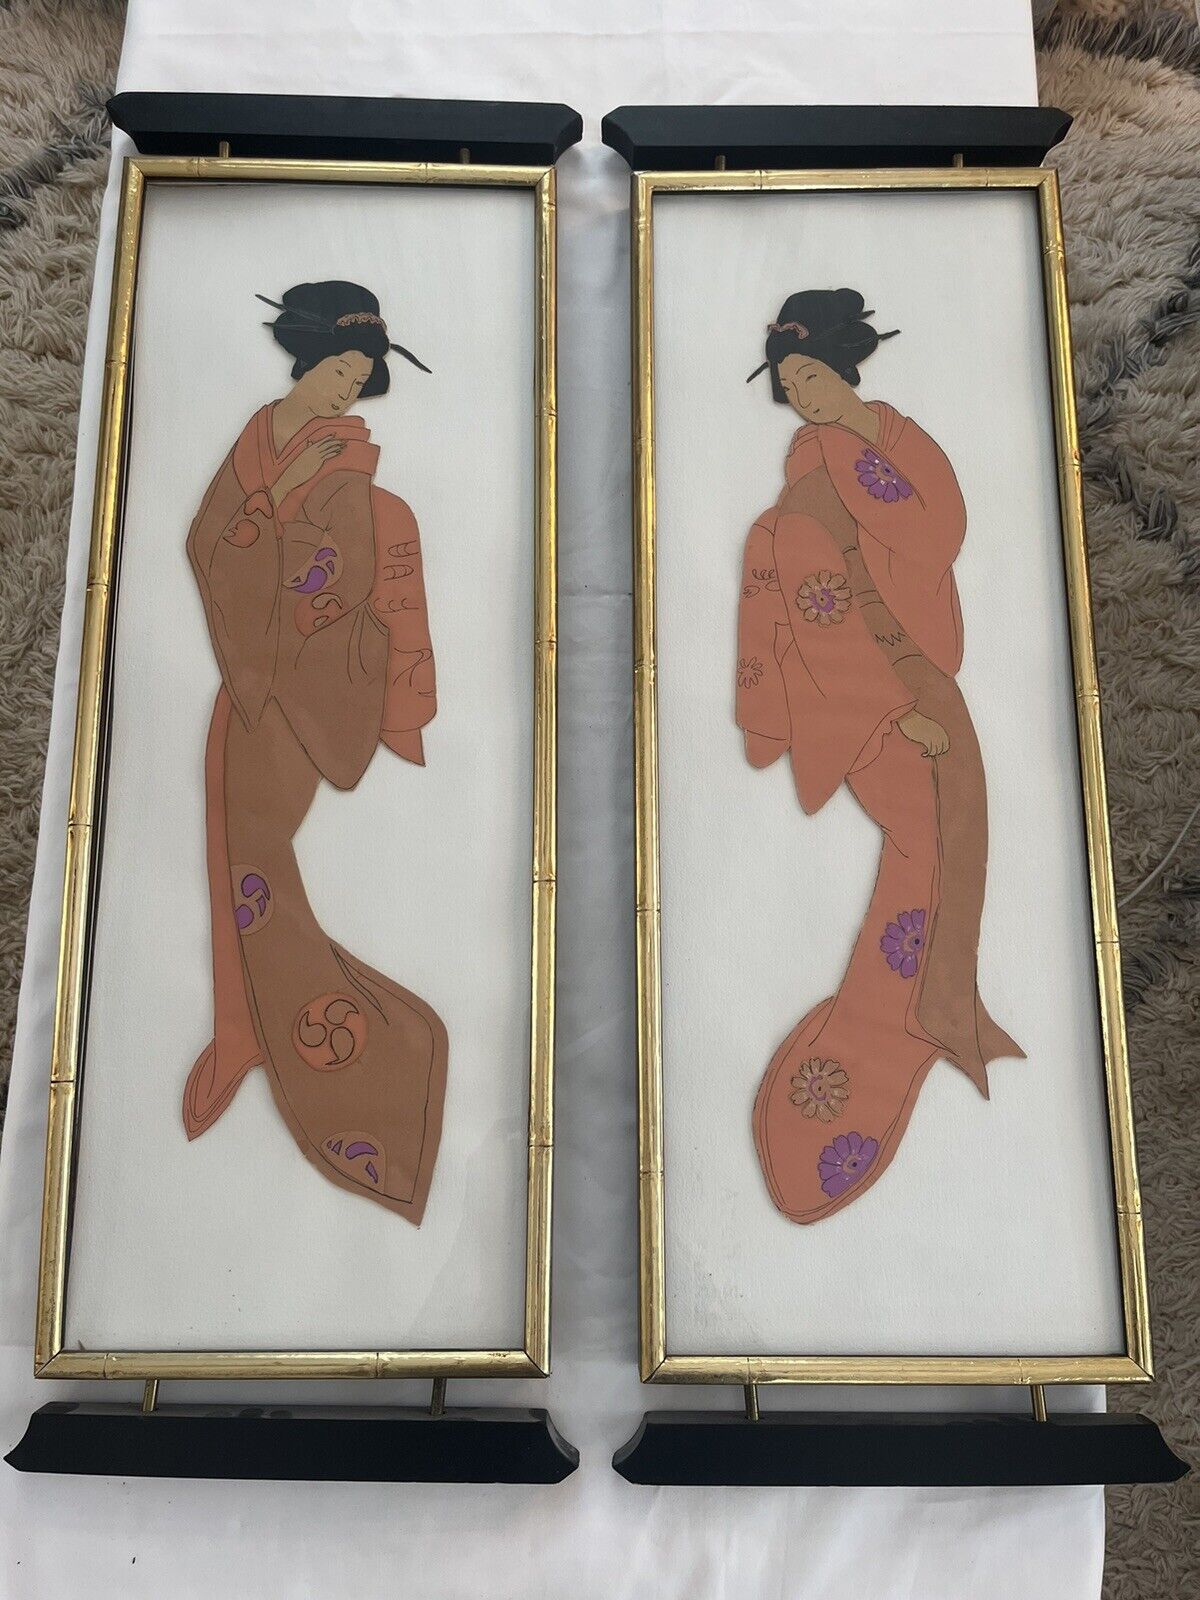 Vintage Collaged Paper Asian Art. Beautifully Framed. 29”x 9 1/2”.